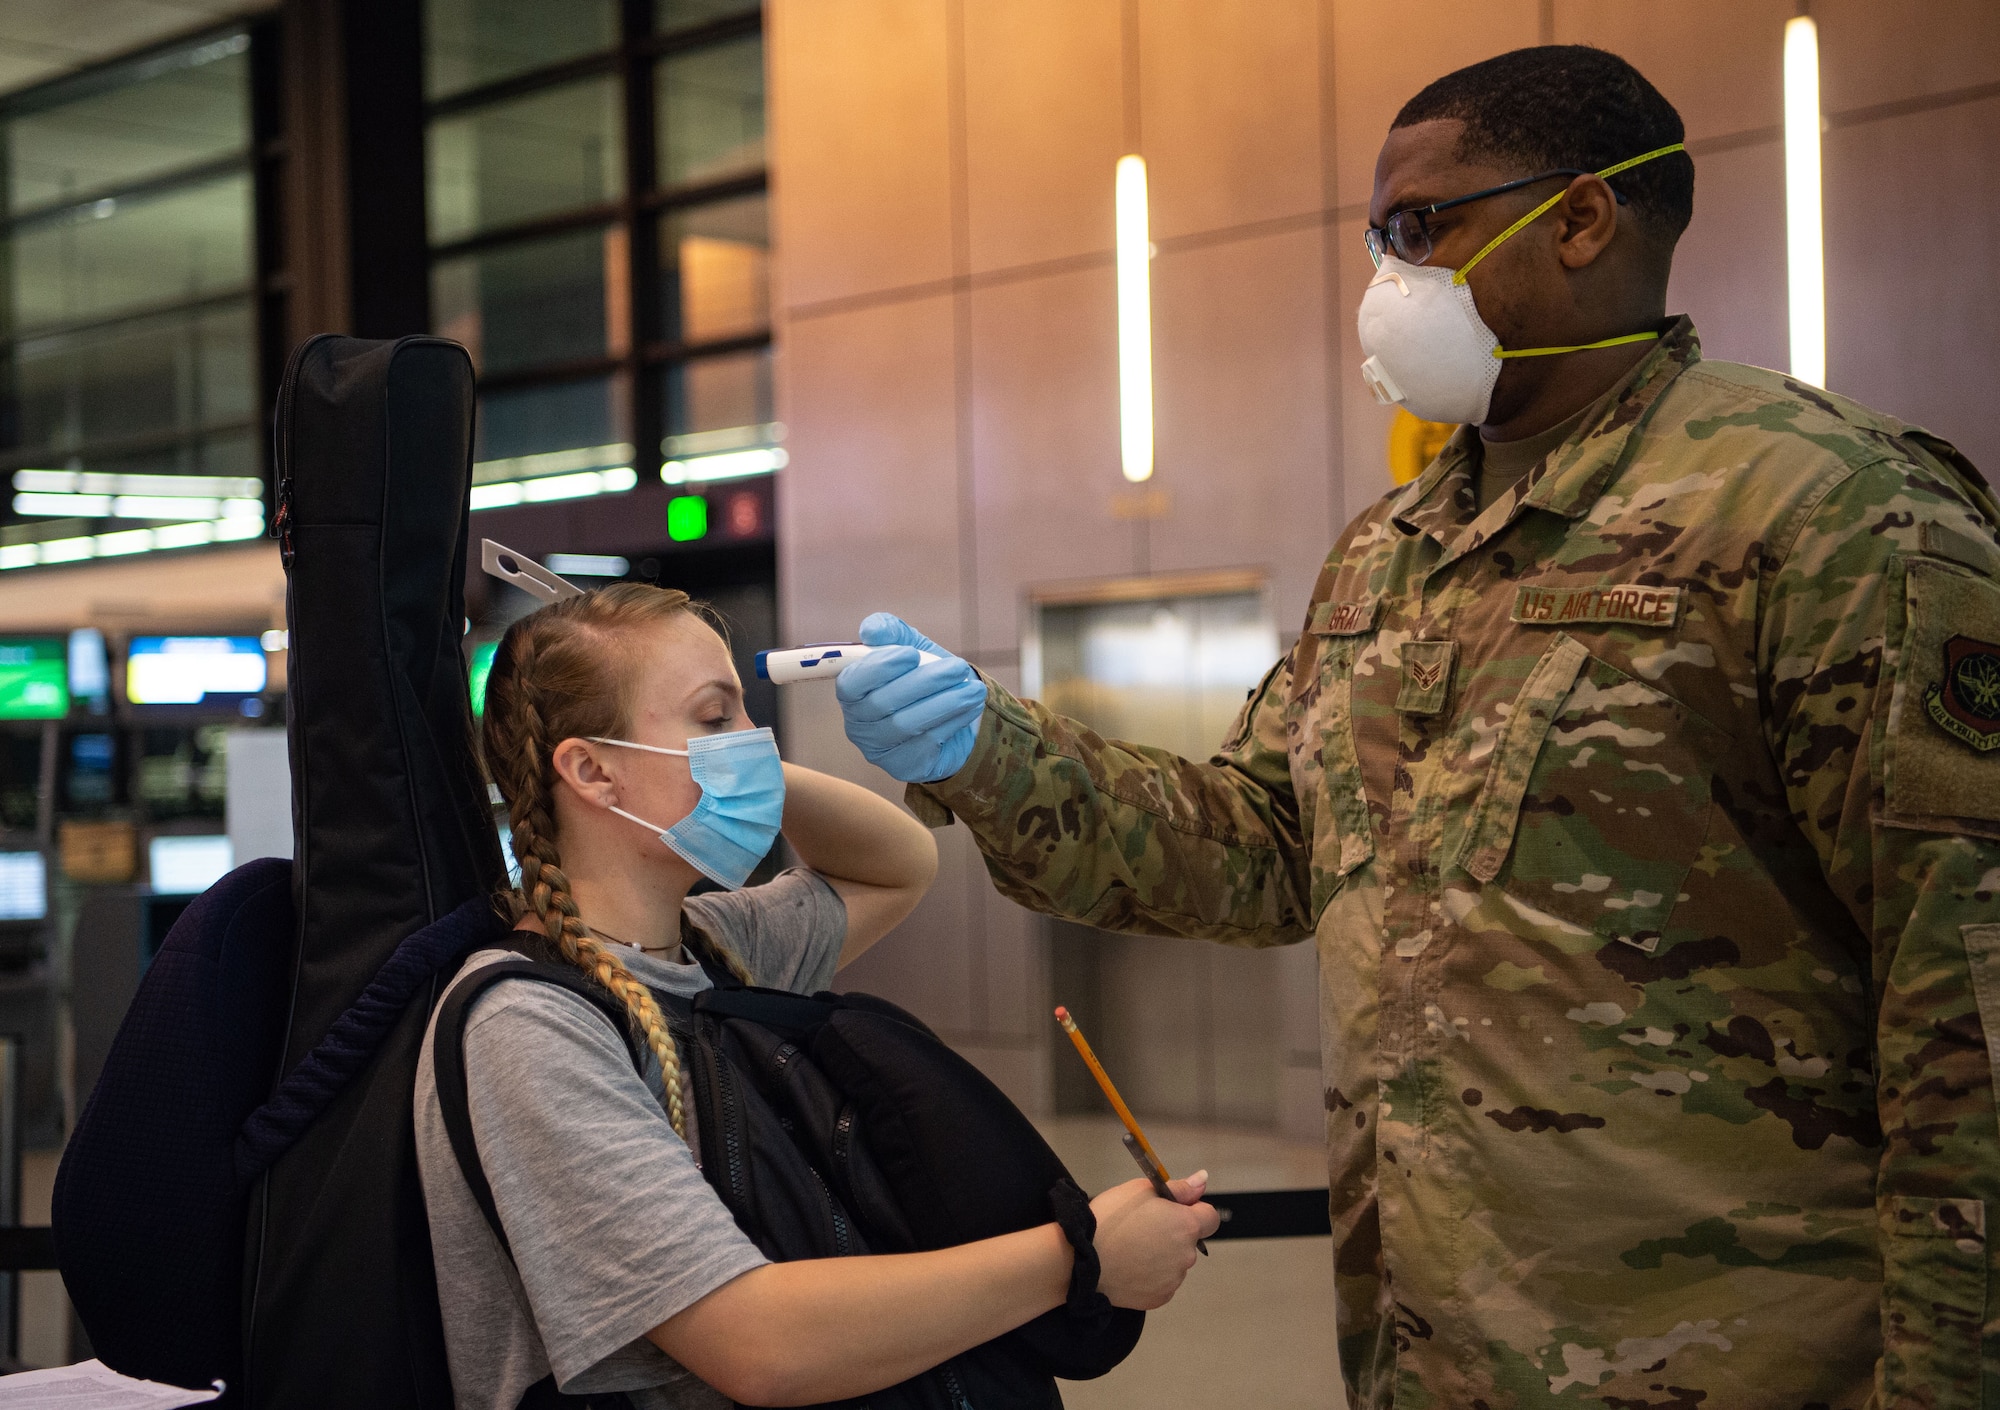 Senior Airman Kevin Gray II, 62nd Aerial Port Squadron passenger service specialist, takes the temperature of a passenger traveling to Asia at the Seattle-Tacoma International Airport in Seattle, Wash., April 30, 2020. Passengers with a fever of 100.4 degrees or higher are denied travel as a precaution against the spread of COVID-19. (U.S. Air Force photo by Senior Airman Tryphena Mayhugh)